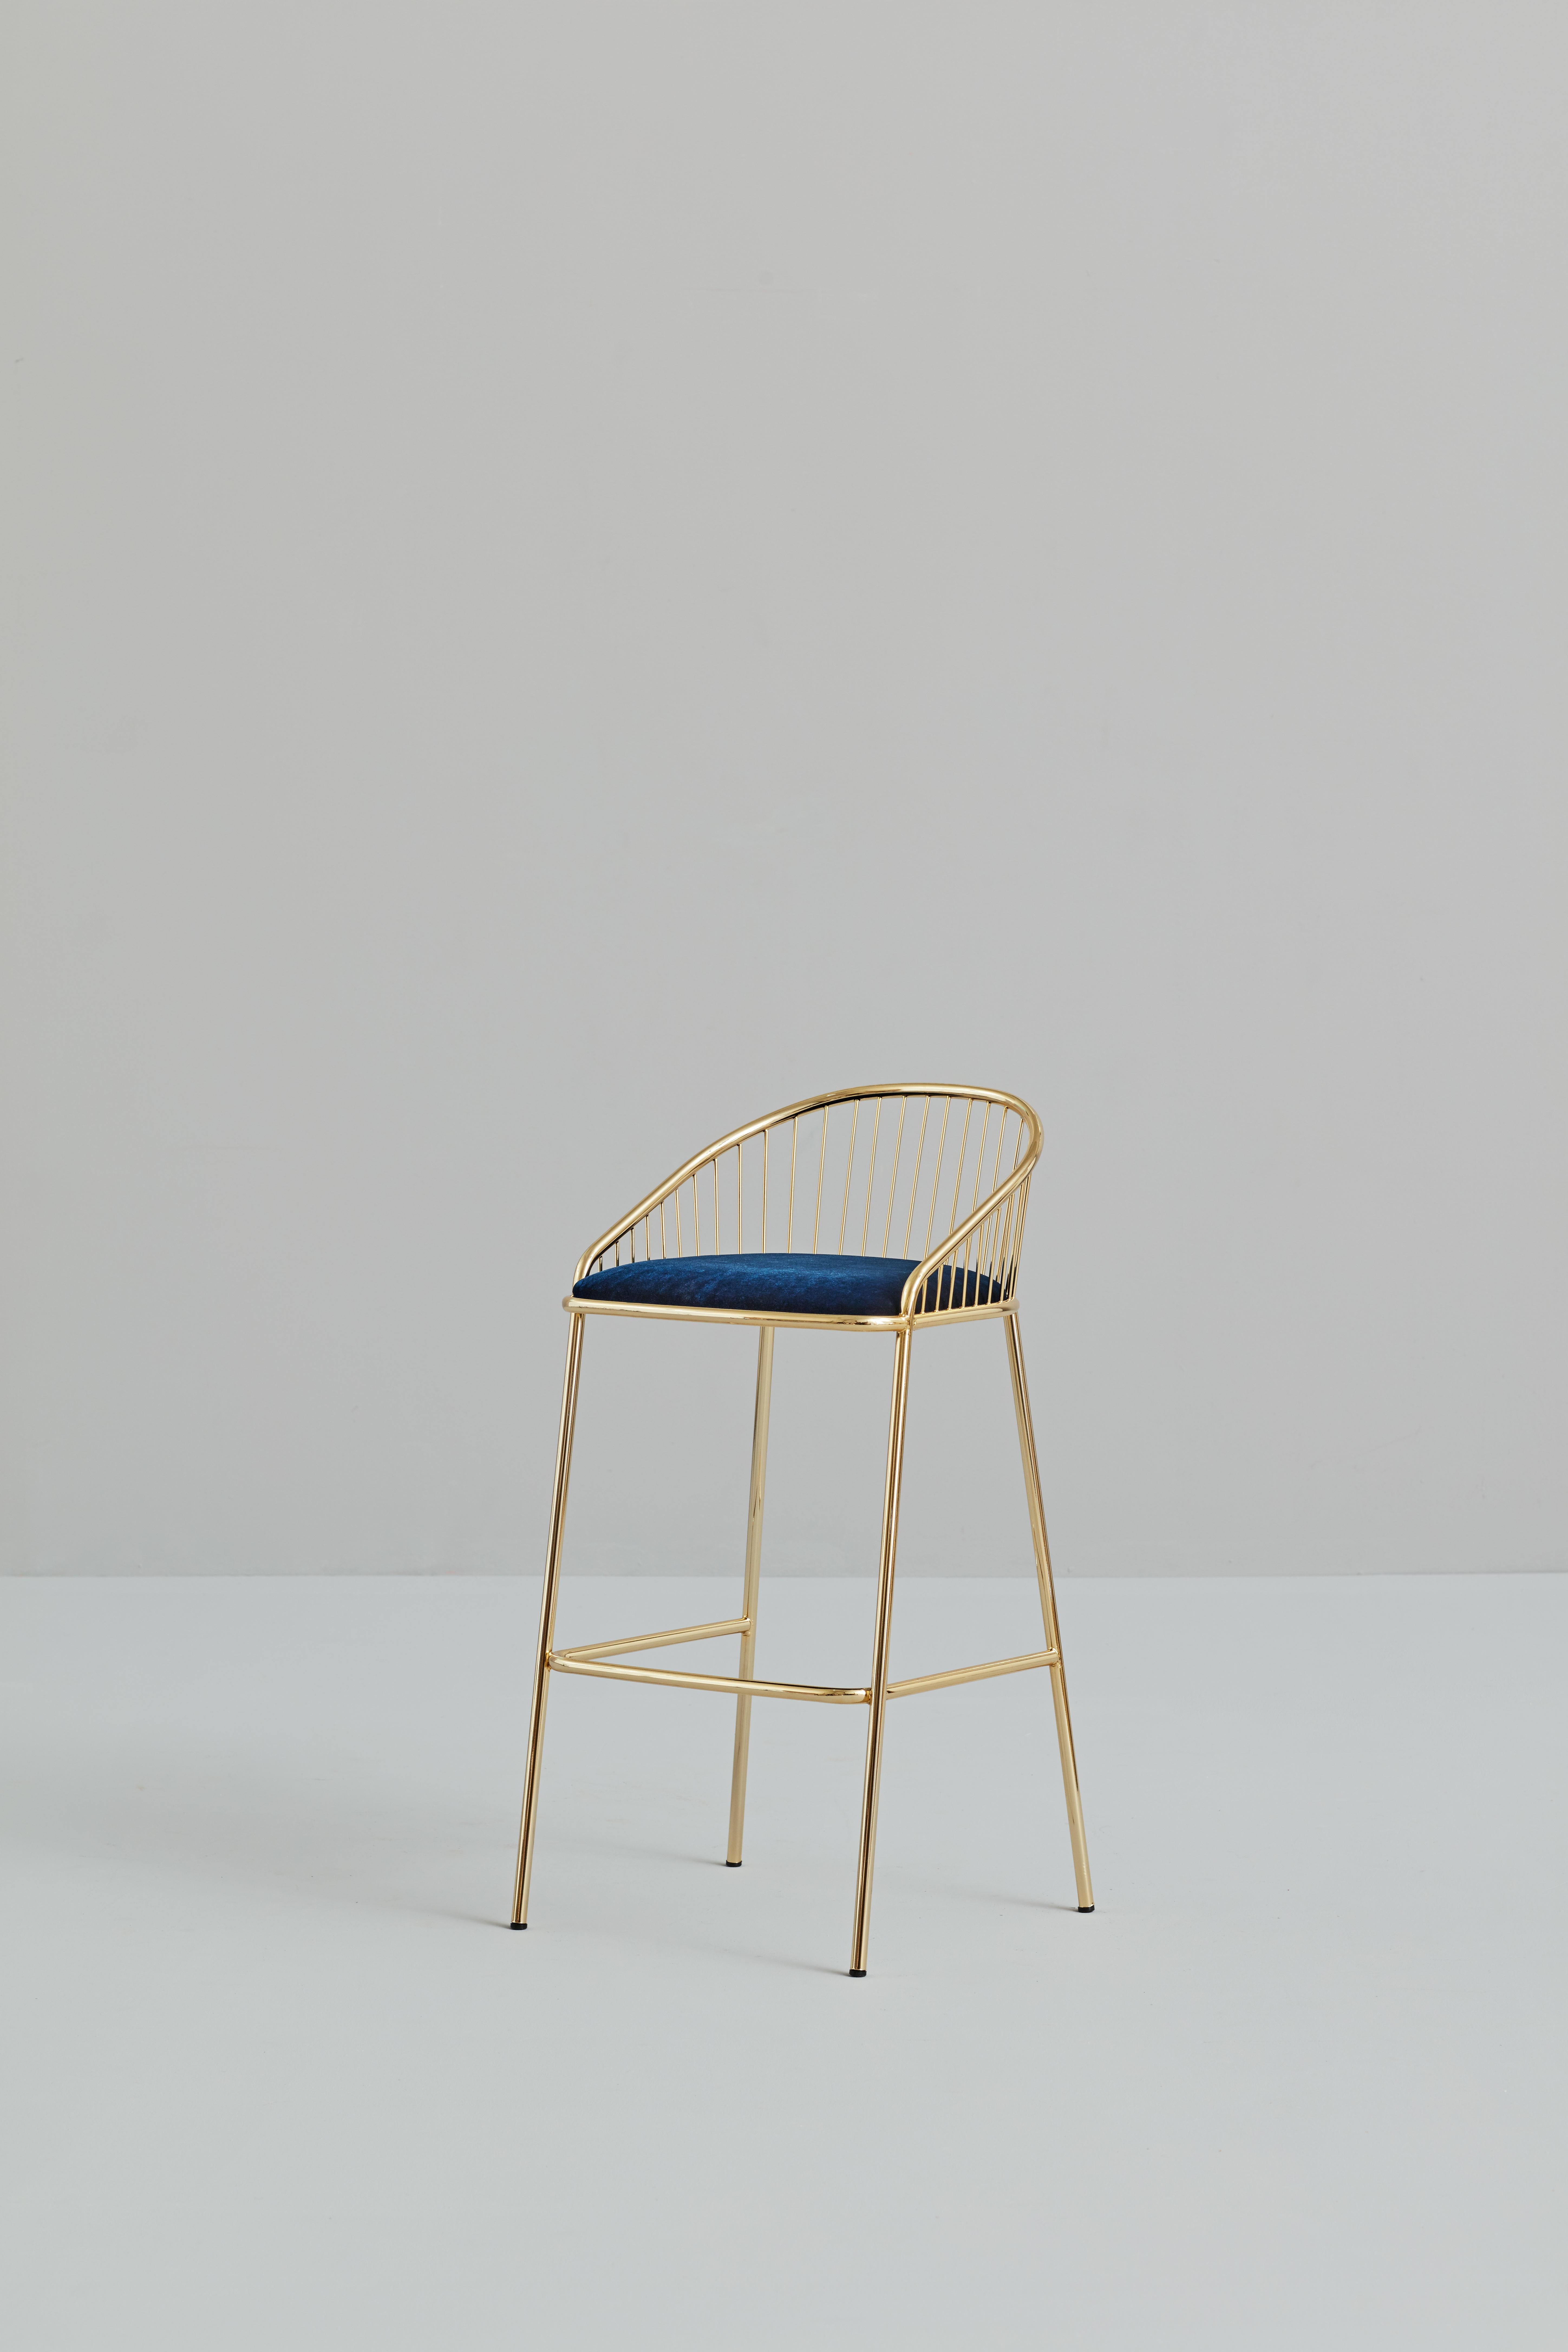 Agora Gold and Black Bar Stool by Pepe Albargues
Dimensions:
Chair 
Height 87 seat 67, depth 52, width 50 cm
Materials:
Iron structure and particles board.
Seat stuffed with polyurethane CMHR40-30.
Lacquered iron legs.

About 
Agora Collection, gold